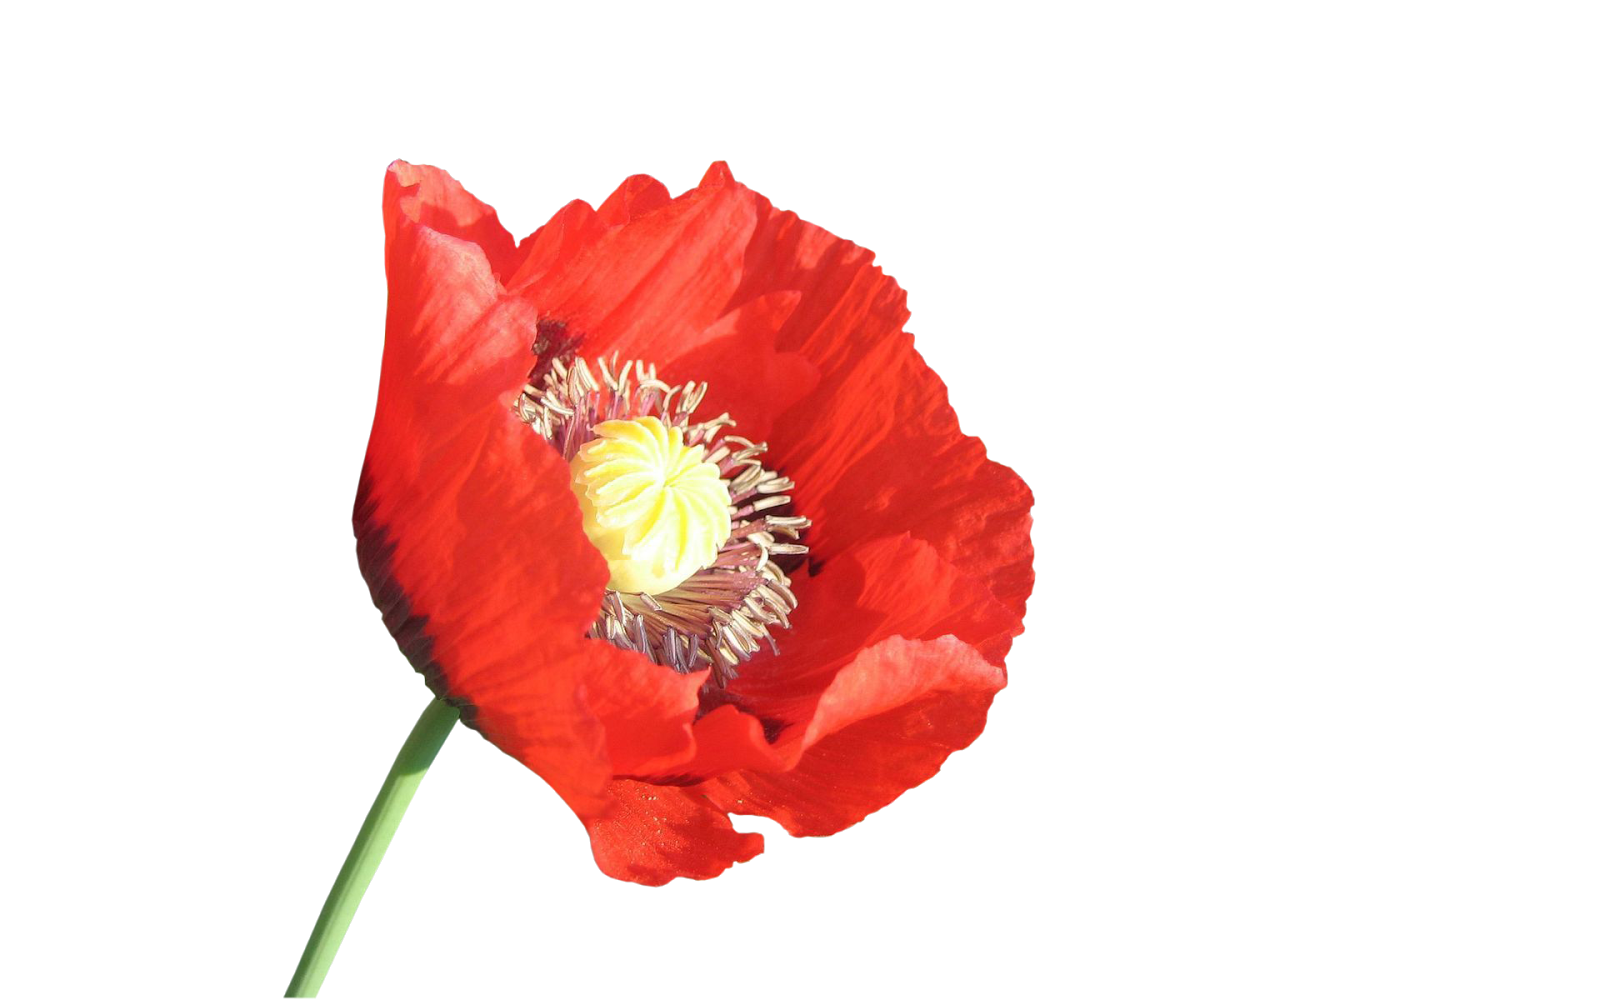 Photoshop Png Frames Wallpaper Designs Poppies